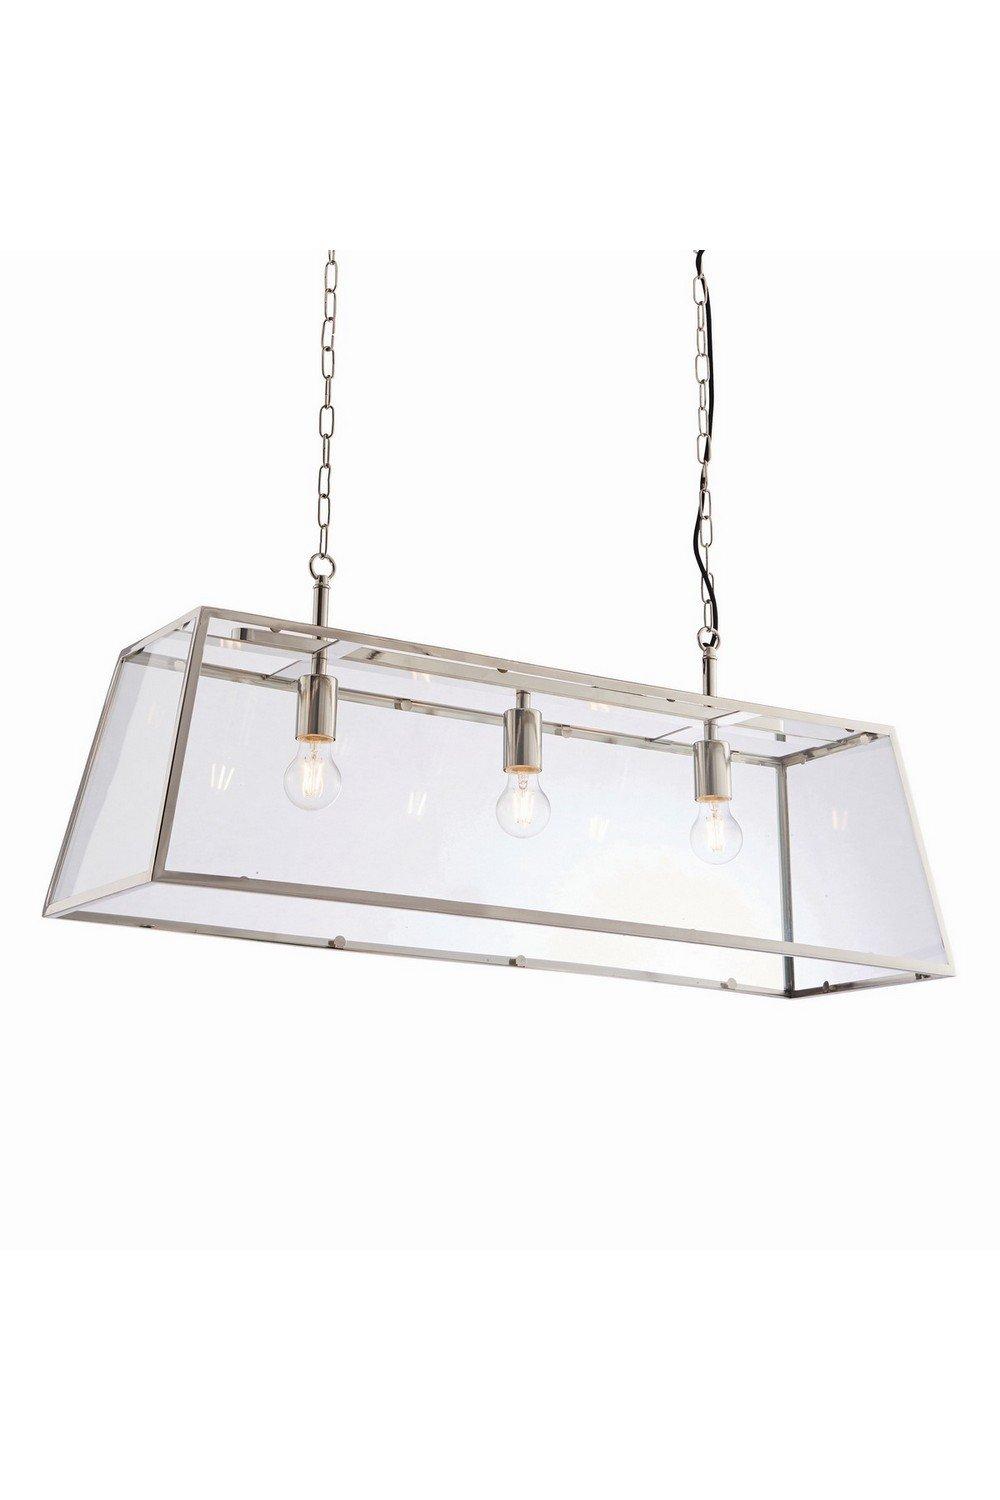 Hurst Pendant Bright Nickel Plate & Clear Glass 3 Light Dimmable IP20 E27